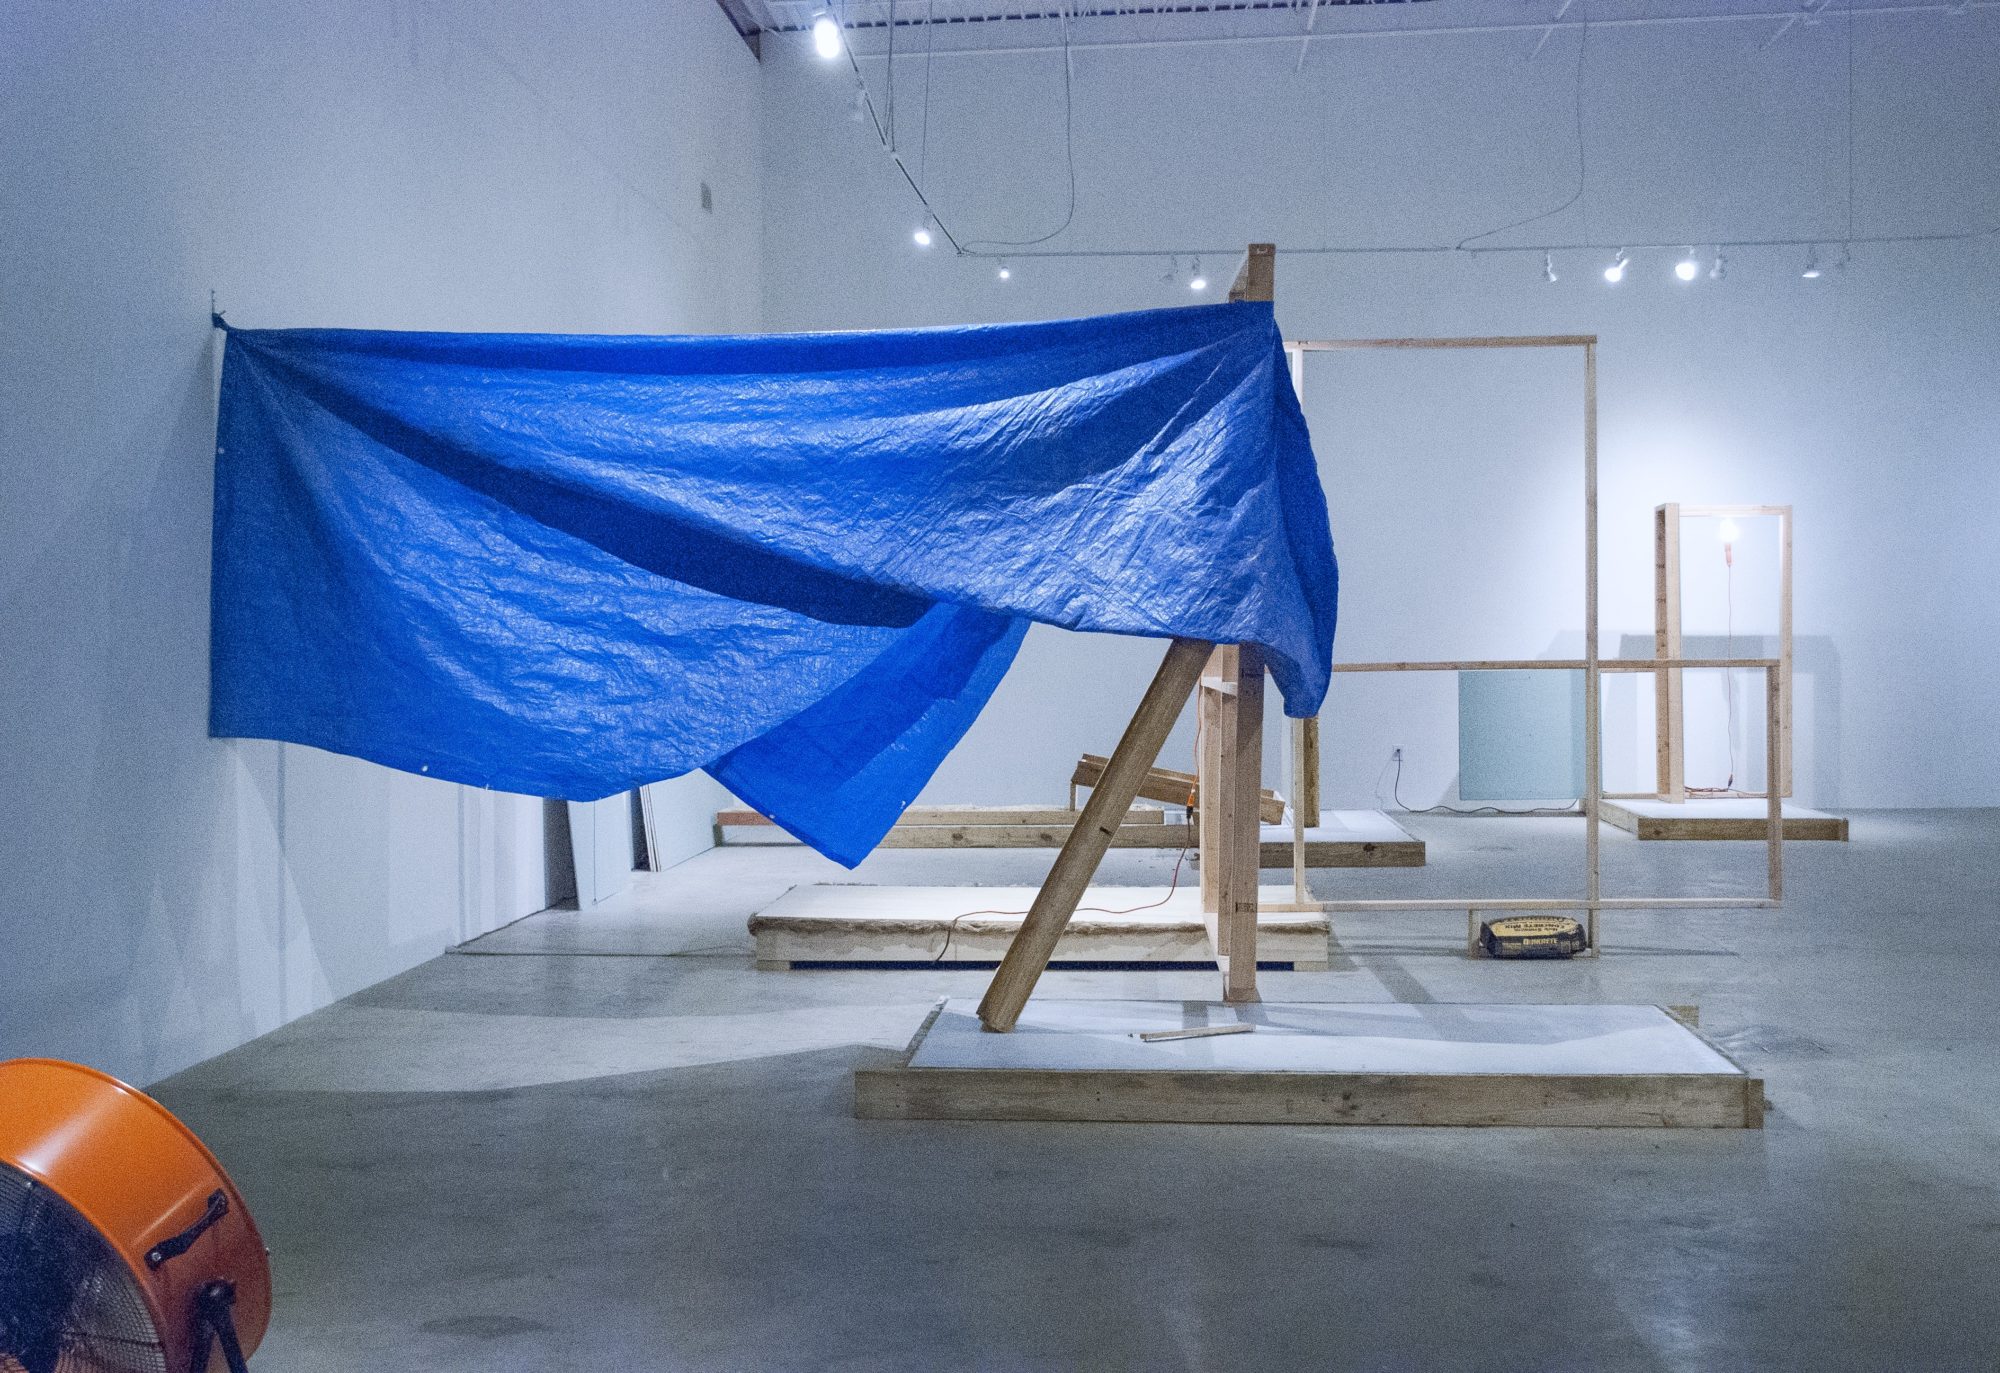 construction site with blue tarp and wood blocks staged in museum space